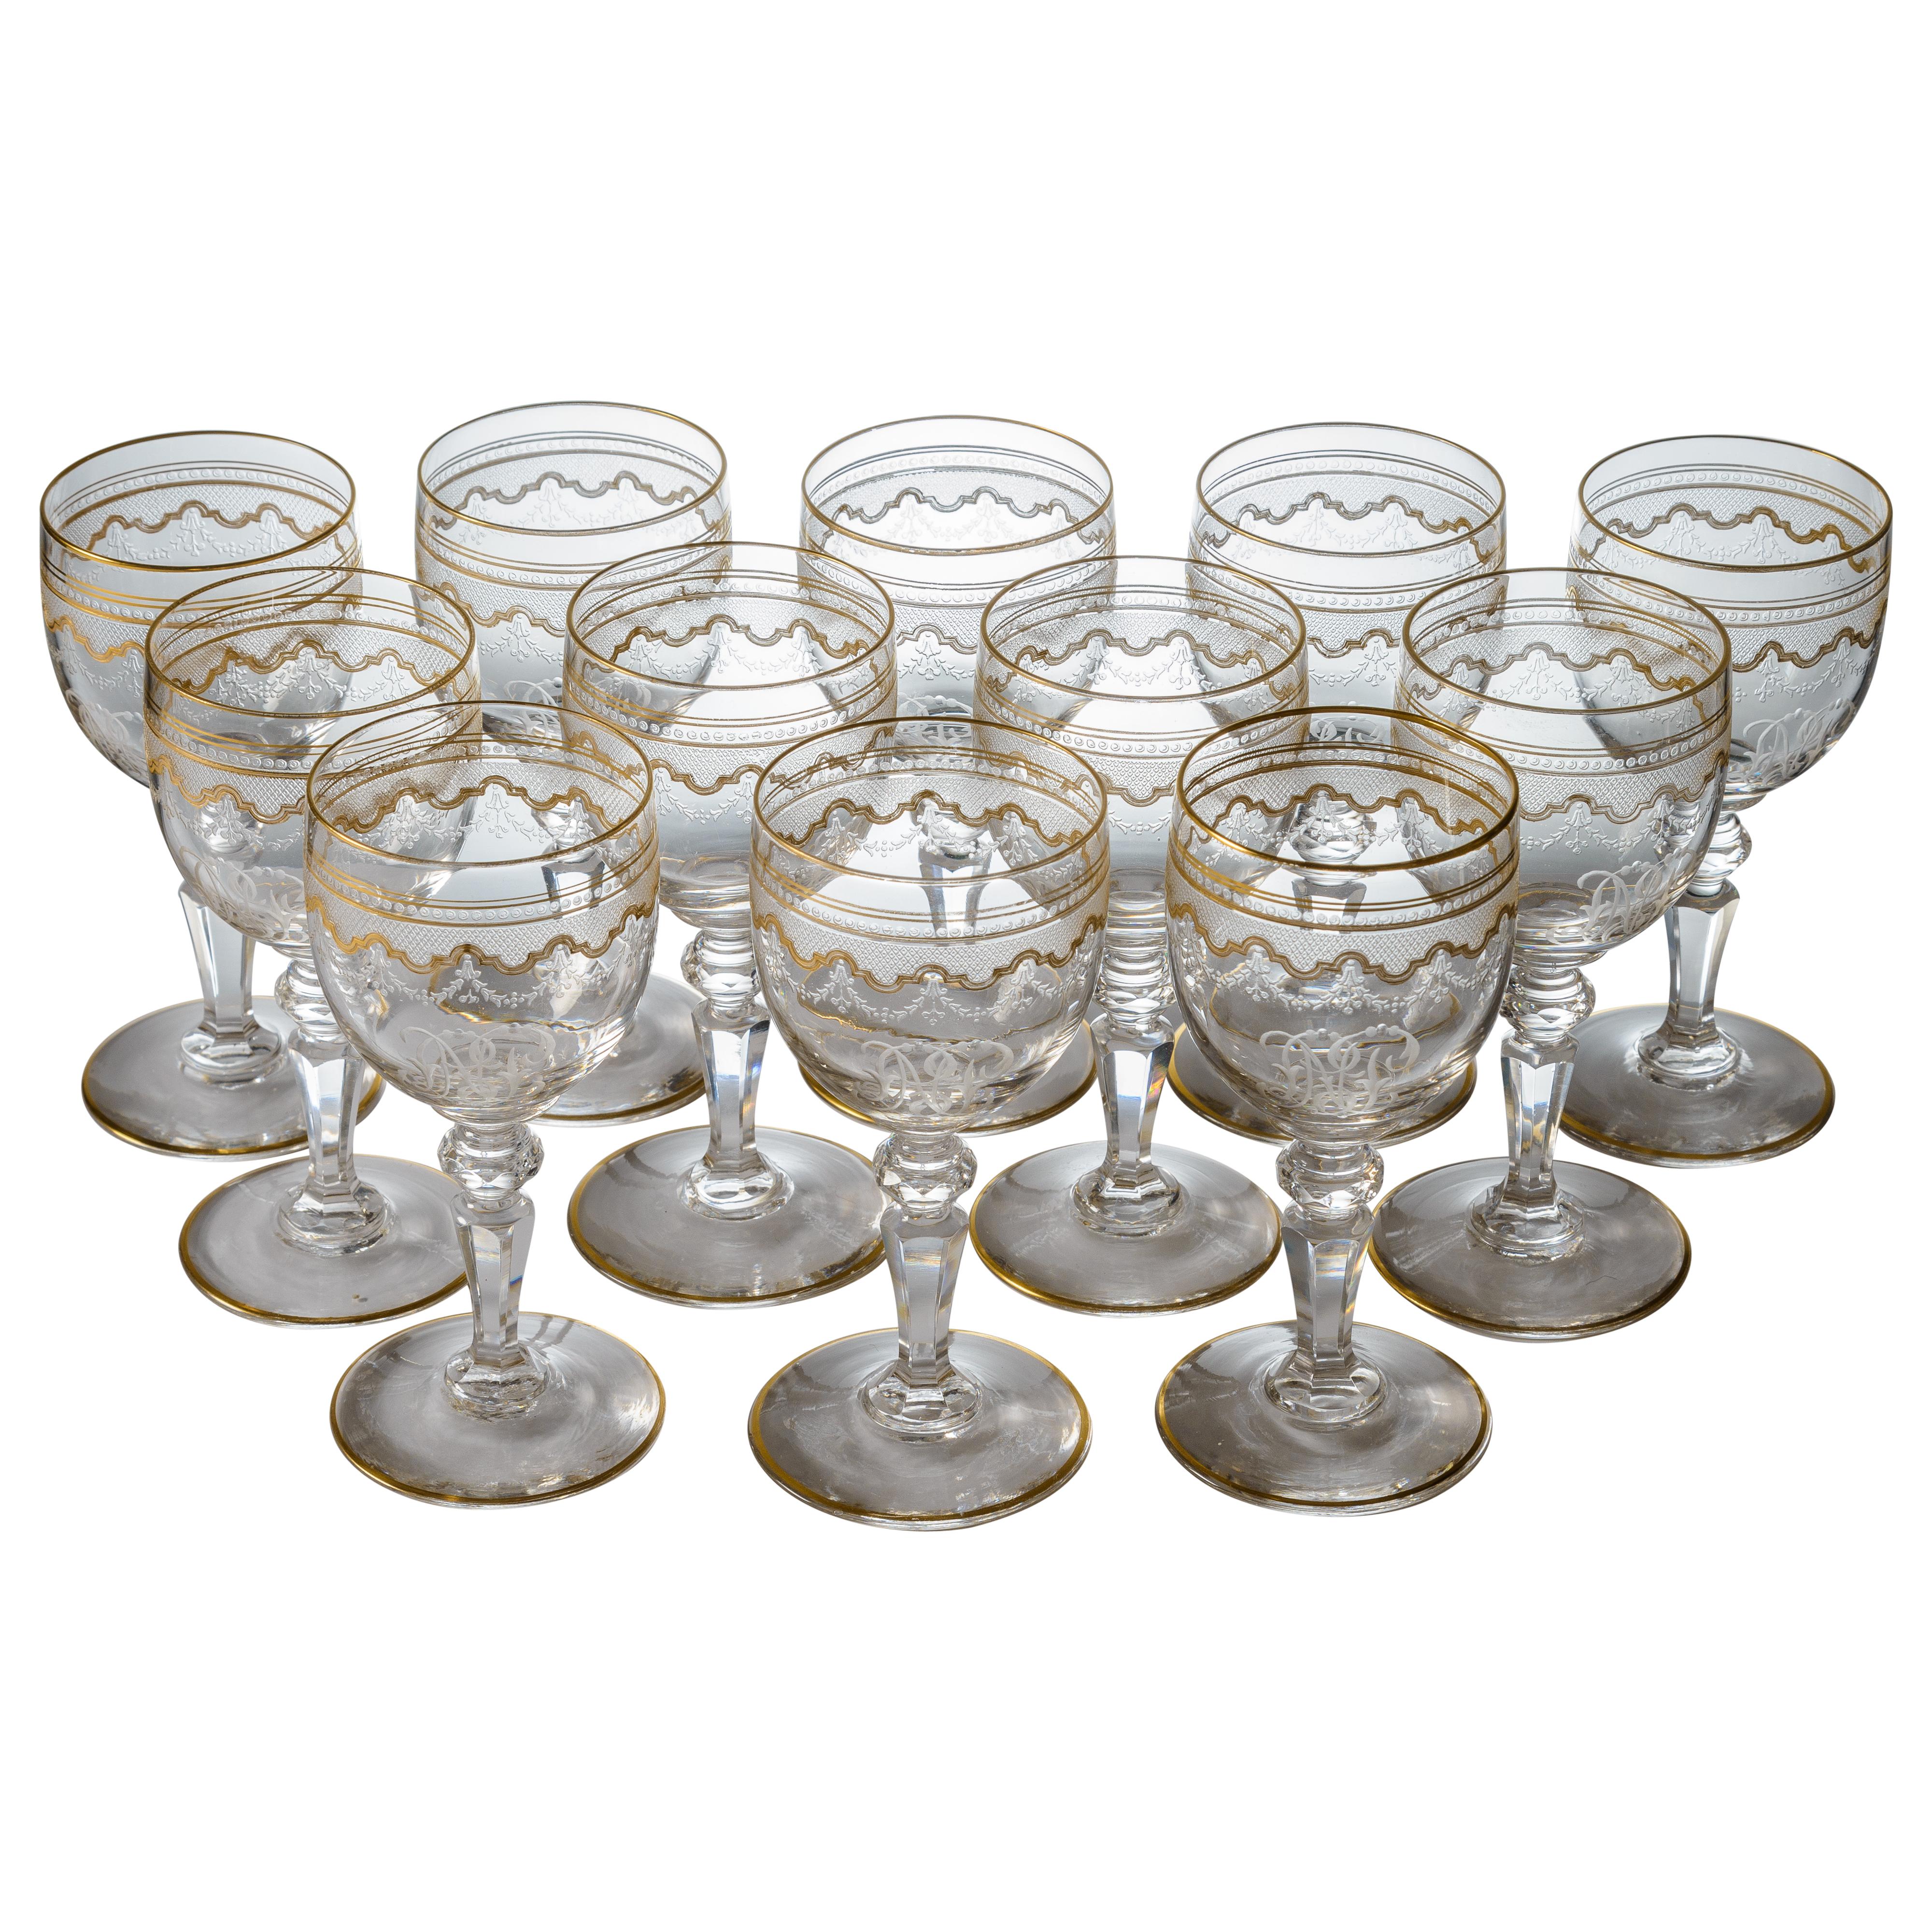 12 Saint Louis Gilt Decorated Wine Glasses With Cut Knob Stems, Antique In Good Condition For Sale In West Palm Beach, FL